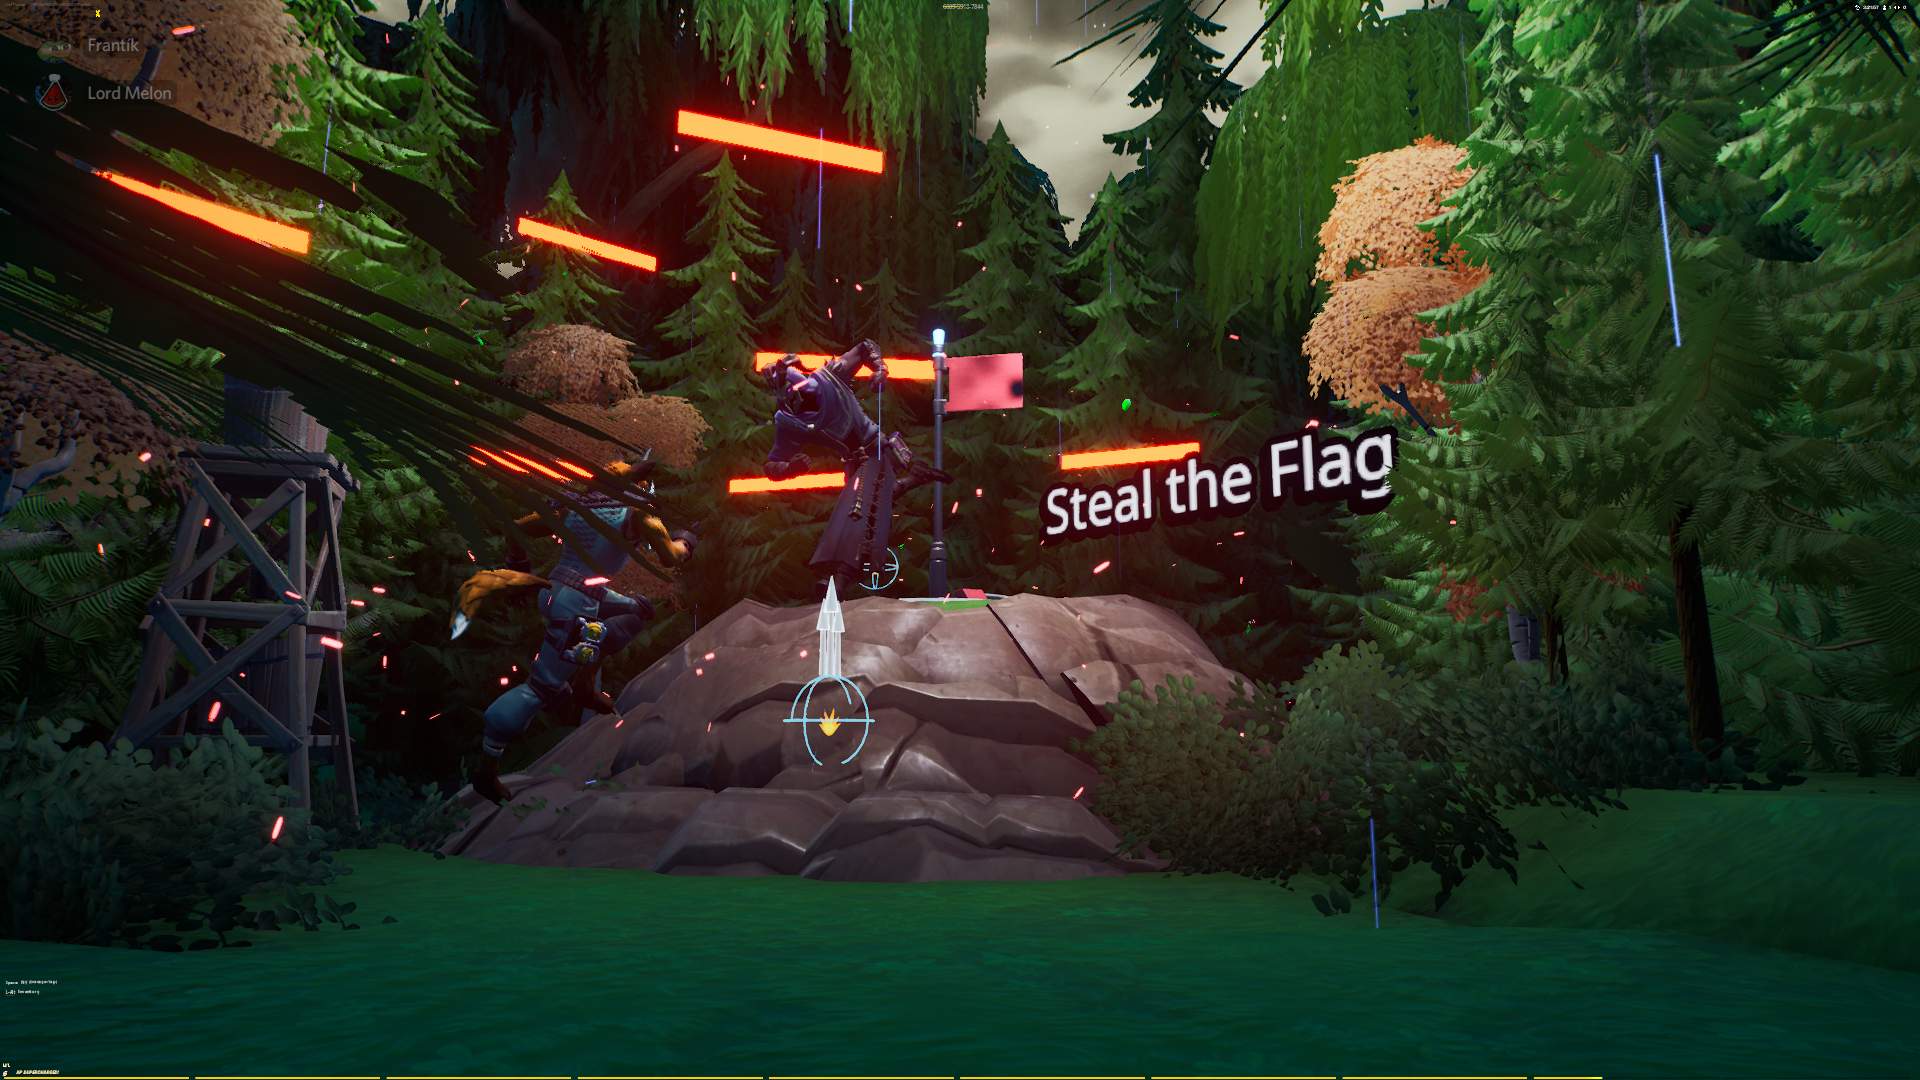 STEAL THE FLAG